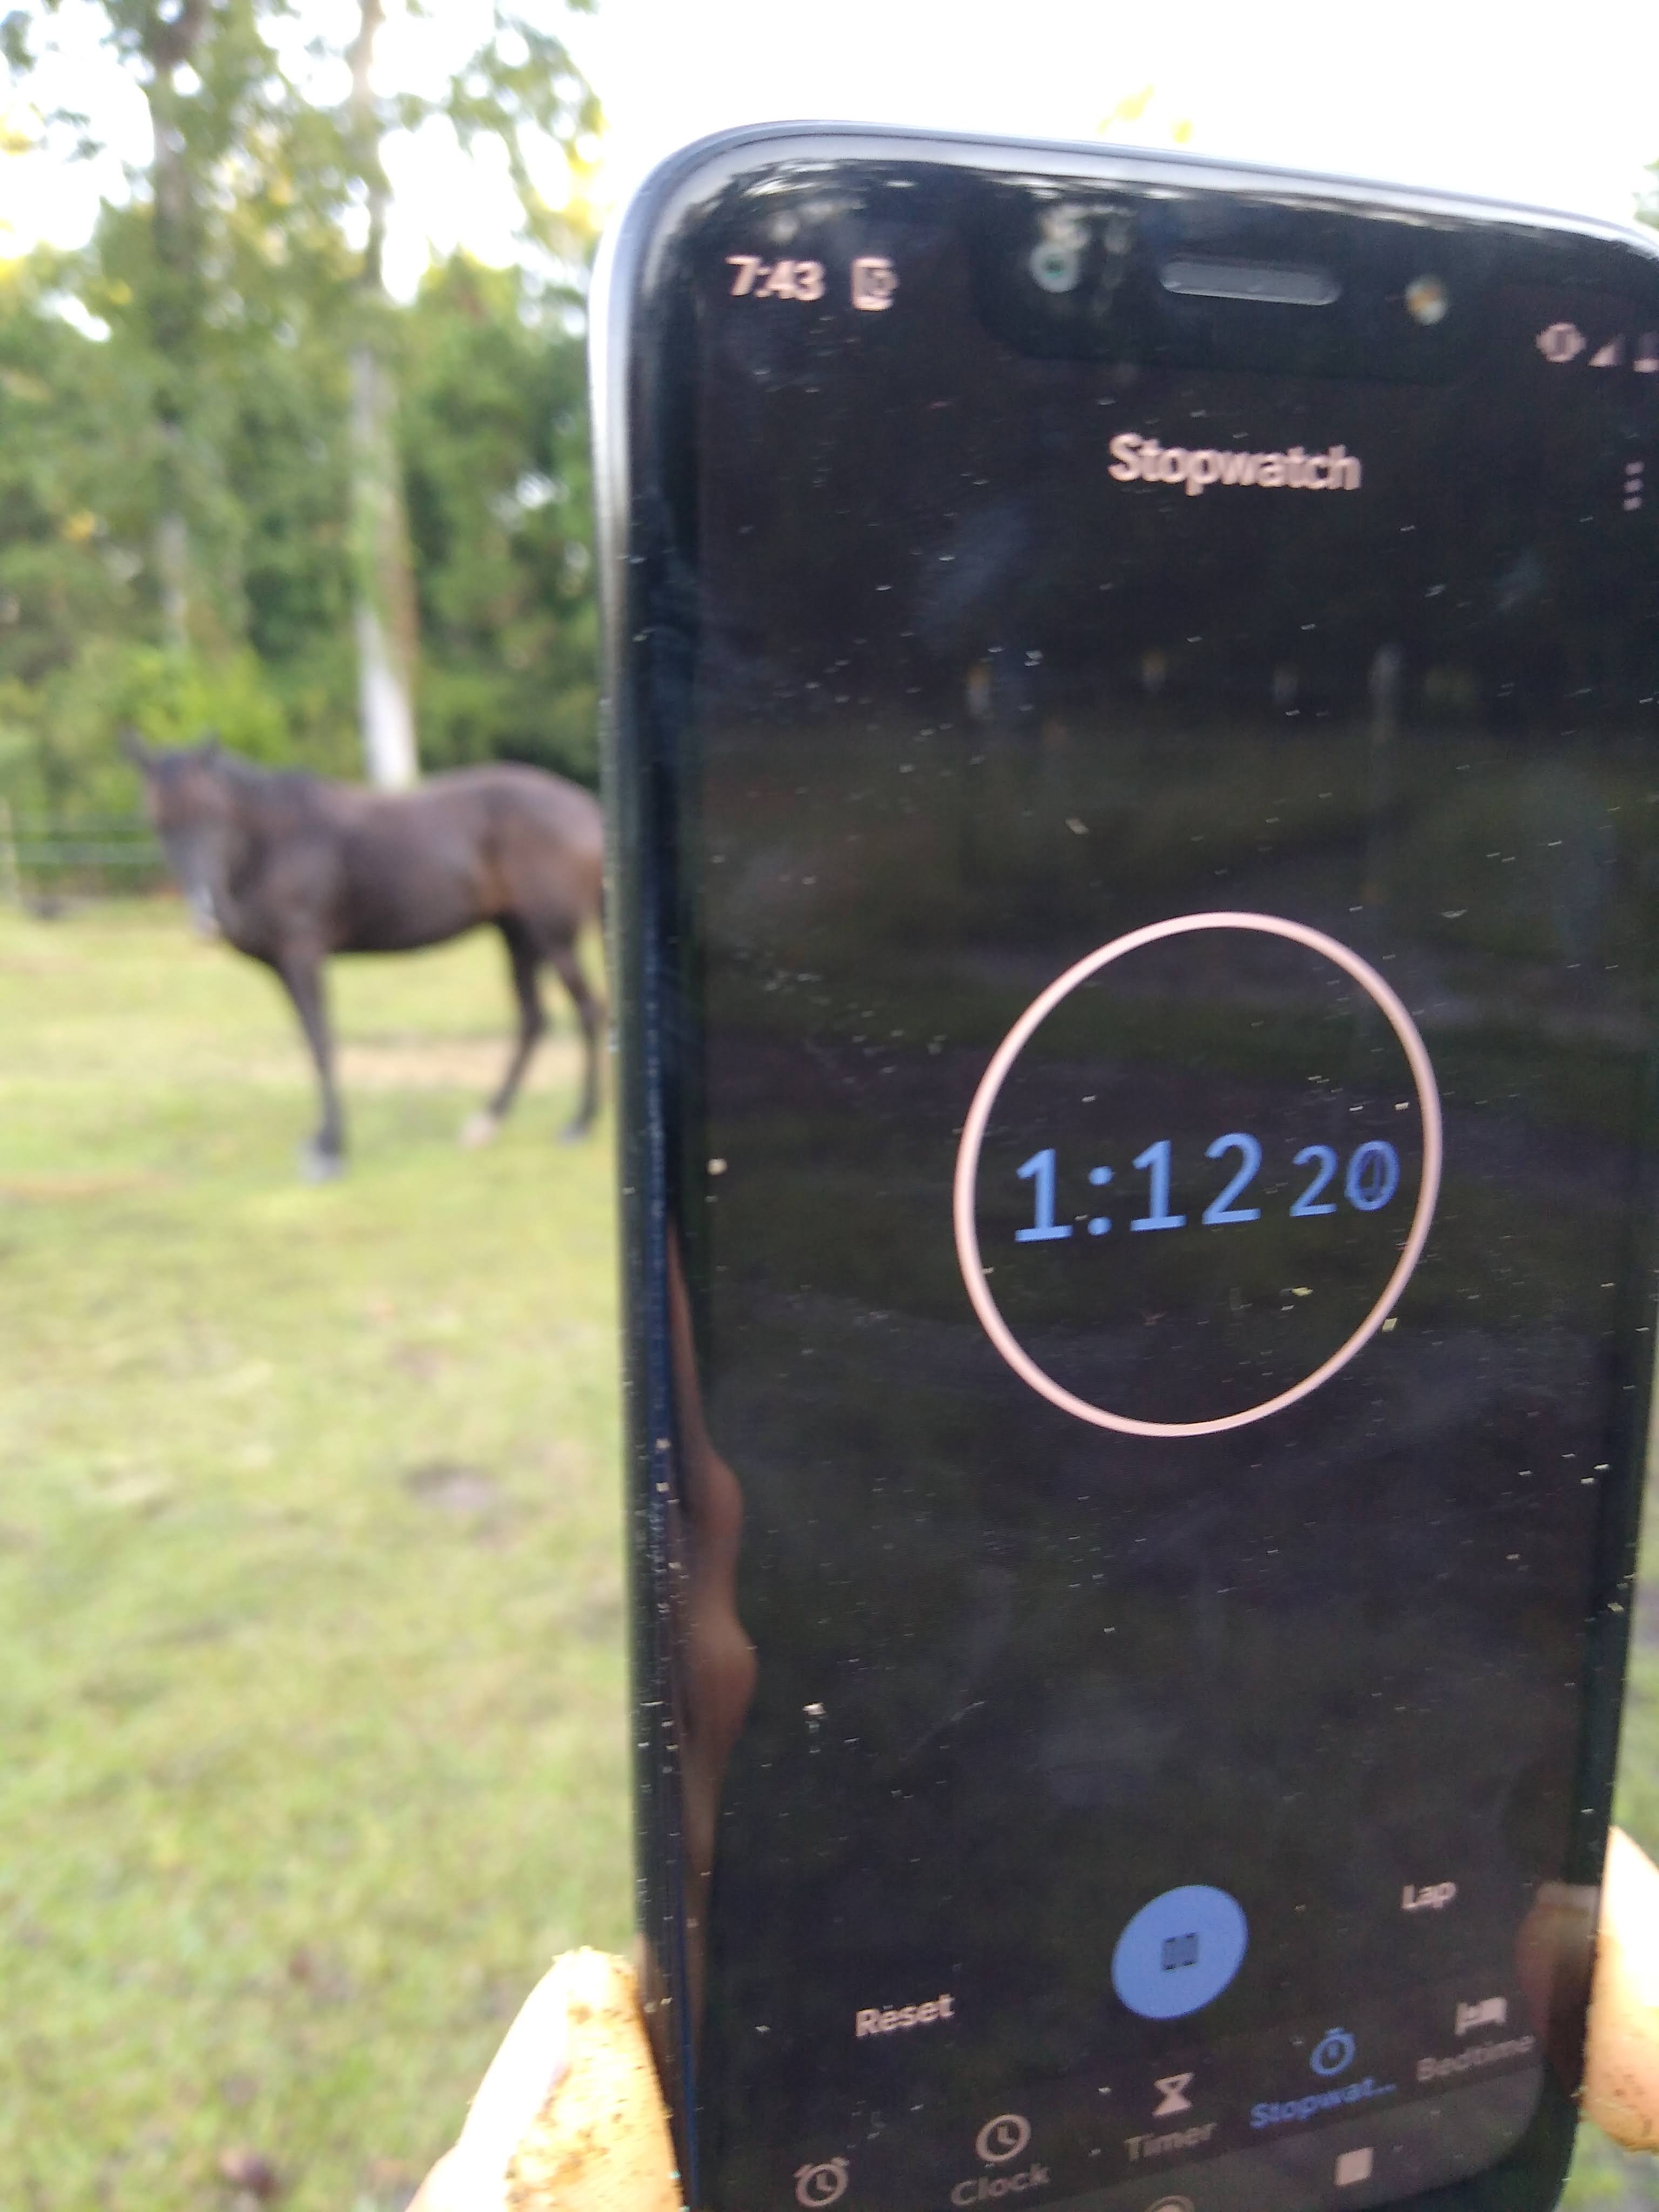 A close up view of a mobile phone with stopwatch app. A horse is out of focus in the background.